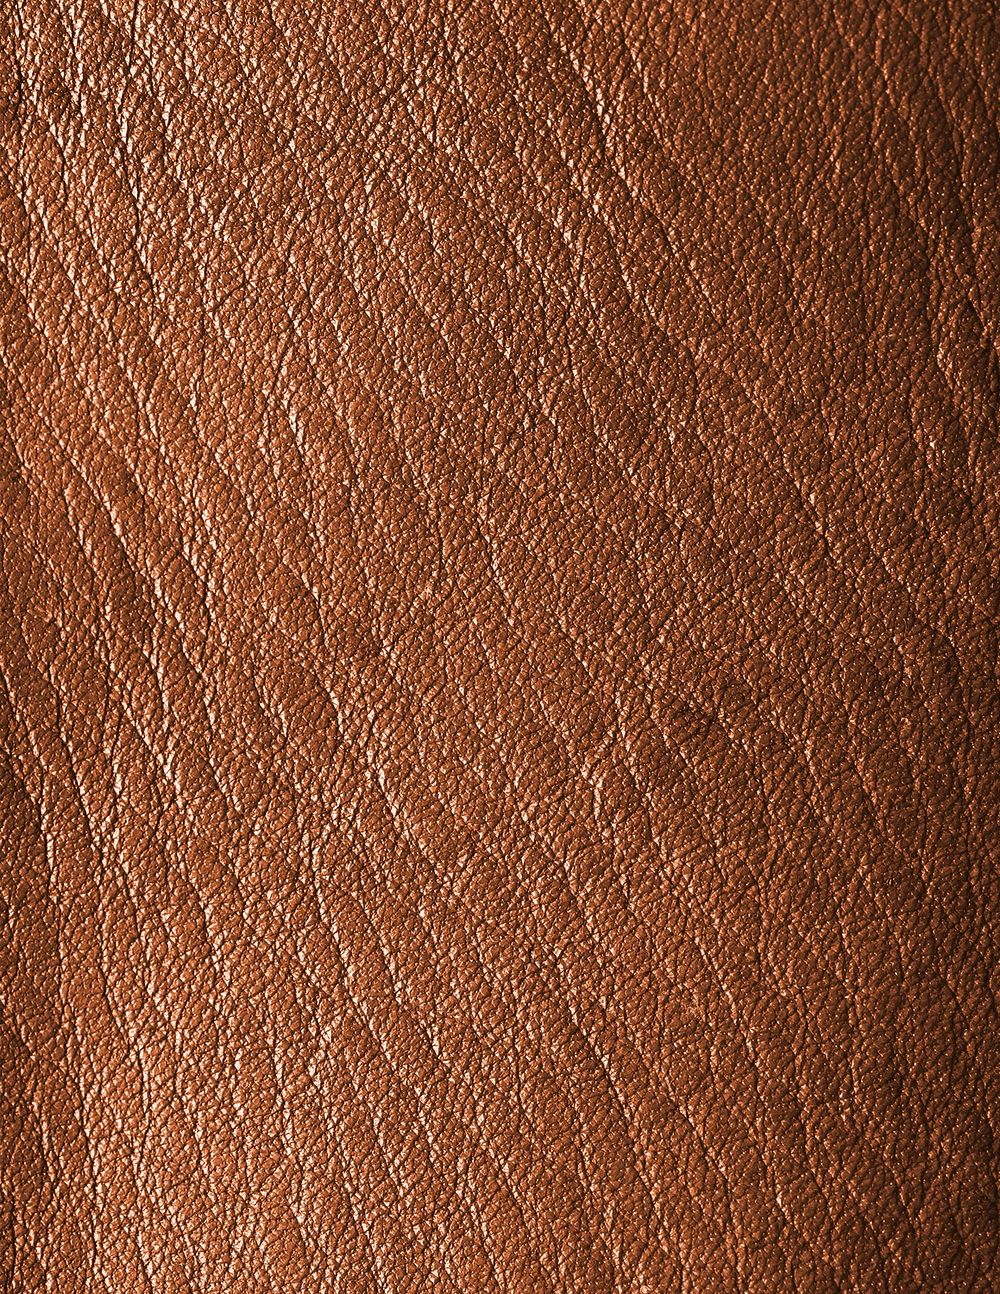 Brown leather texture background, clothing material design